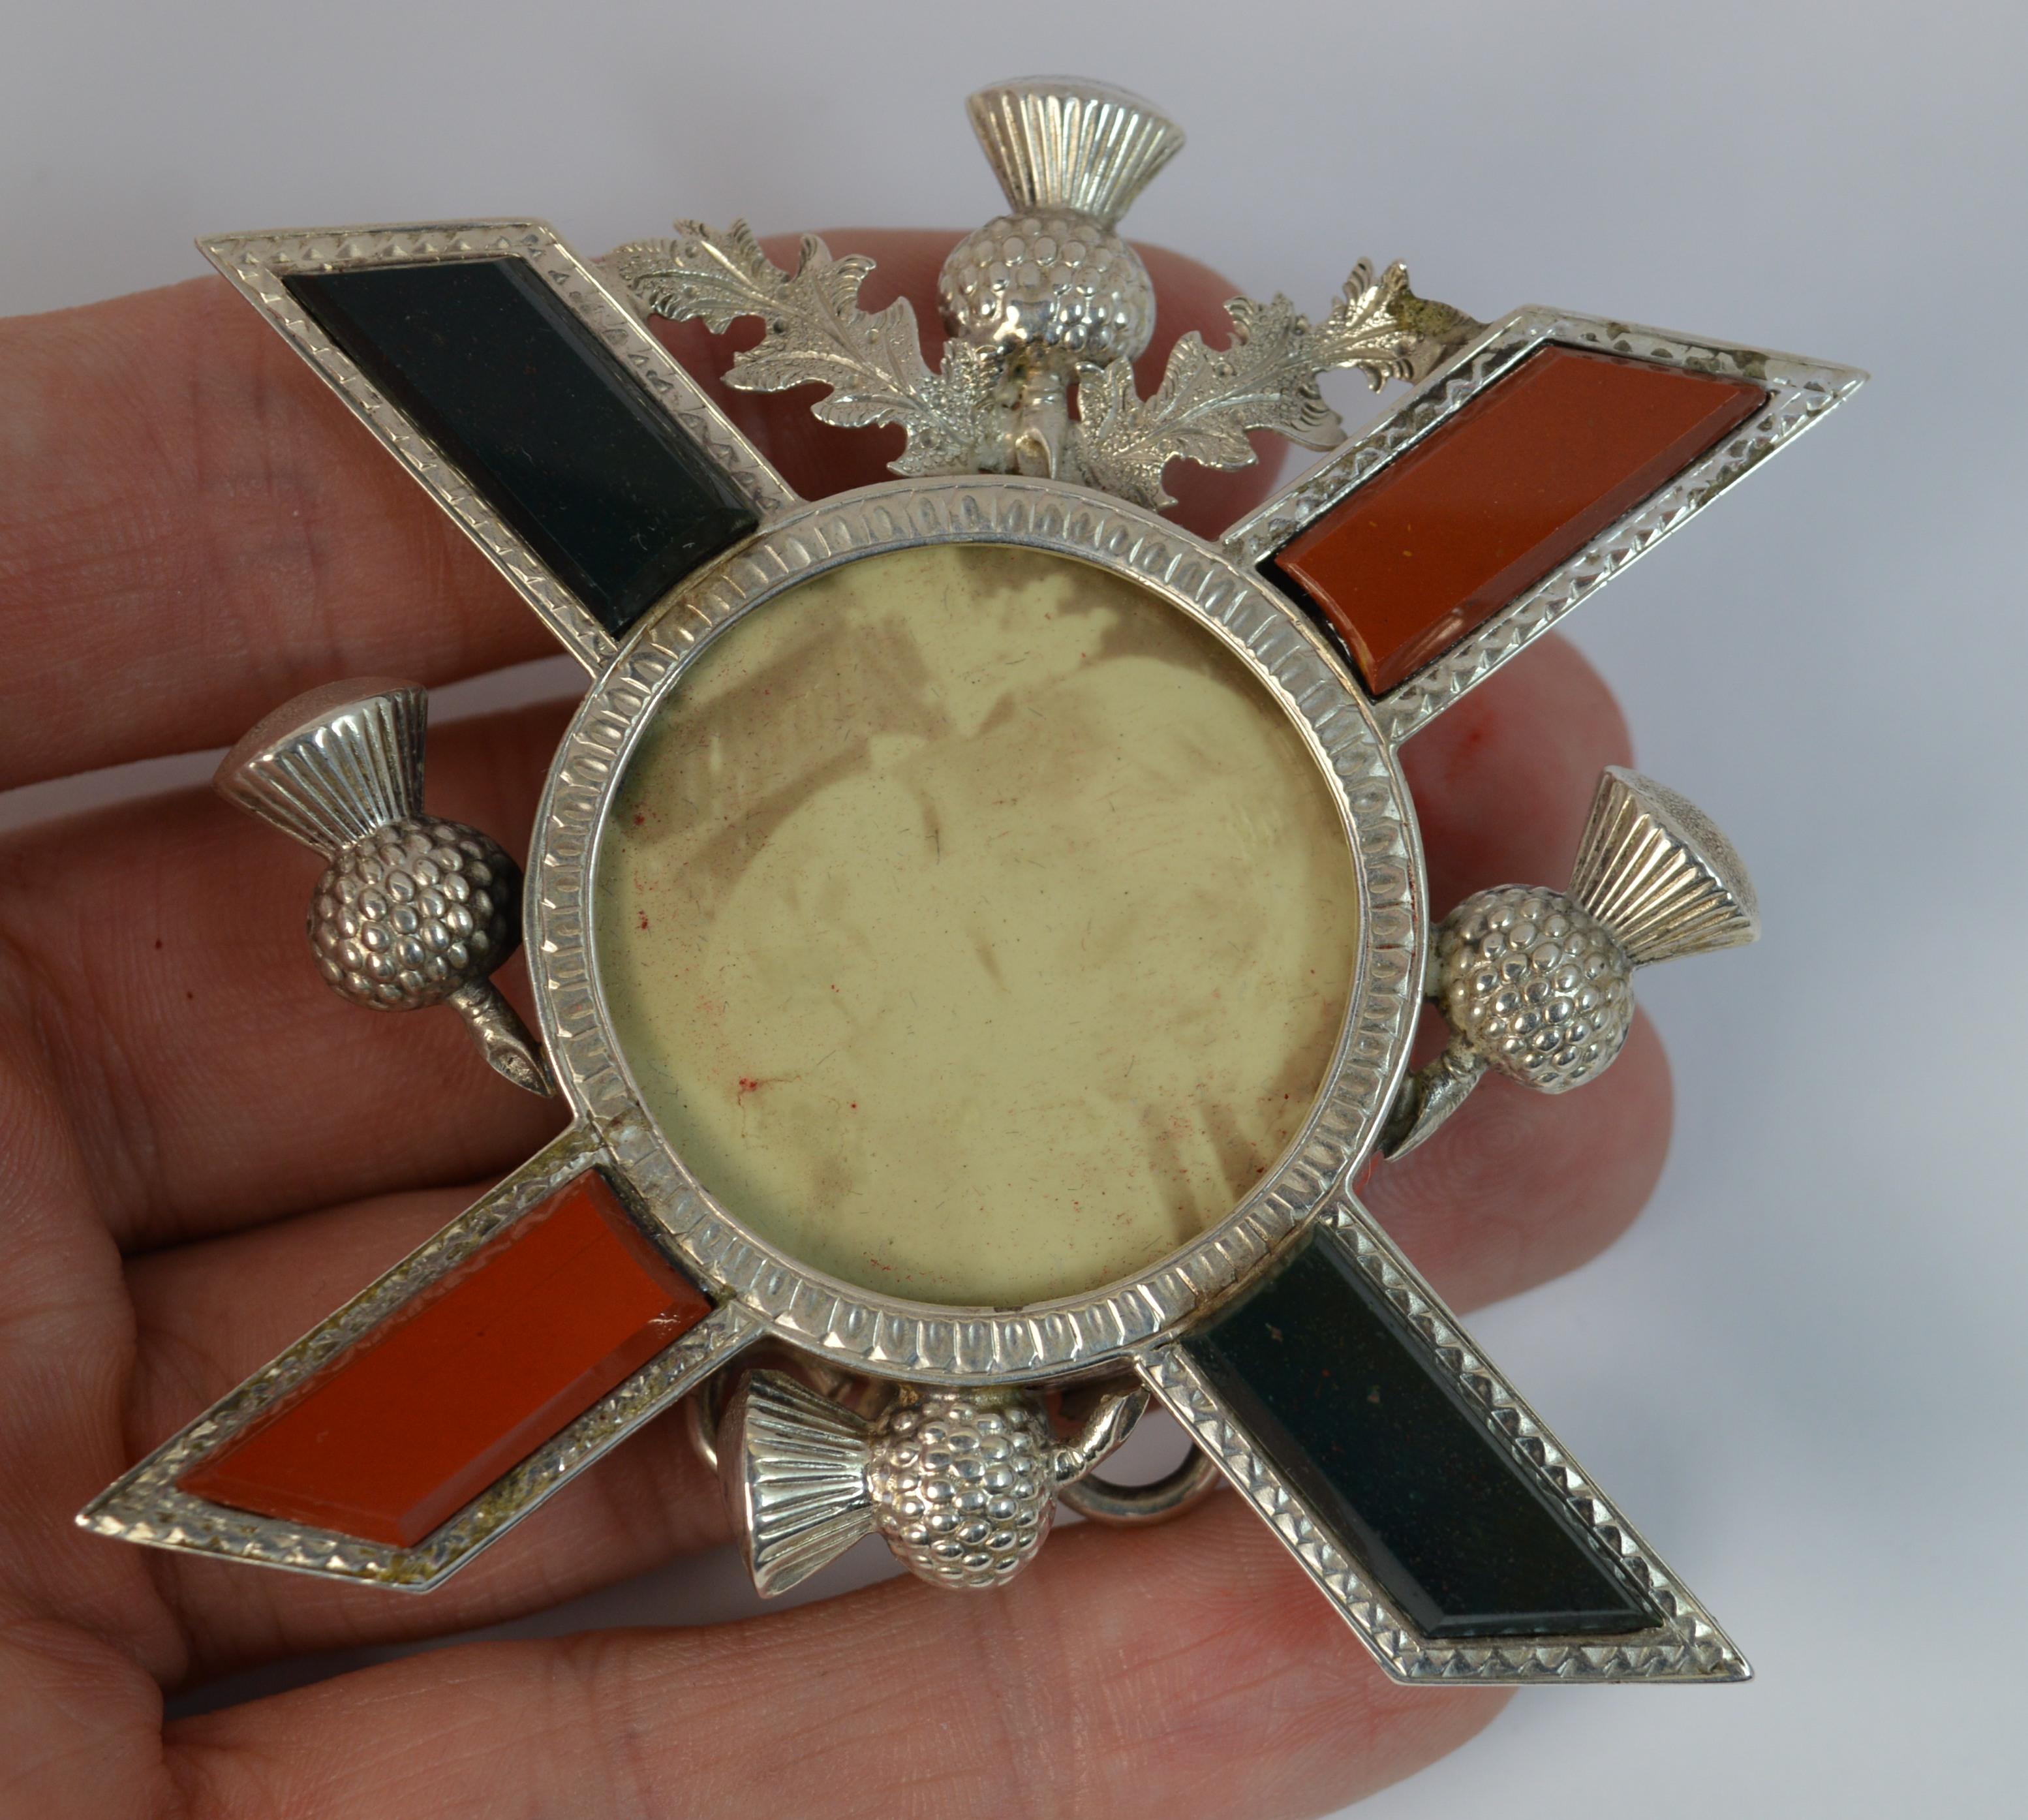 A fine quality sterling silver photo frame of Edwardian era.
Sterling silver example with Scottish thistle design throughout and cross pattern set with two bloodstones and two carnelians. 
Unusual shape and design.

Hallmarks ; lion, Birmingham